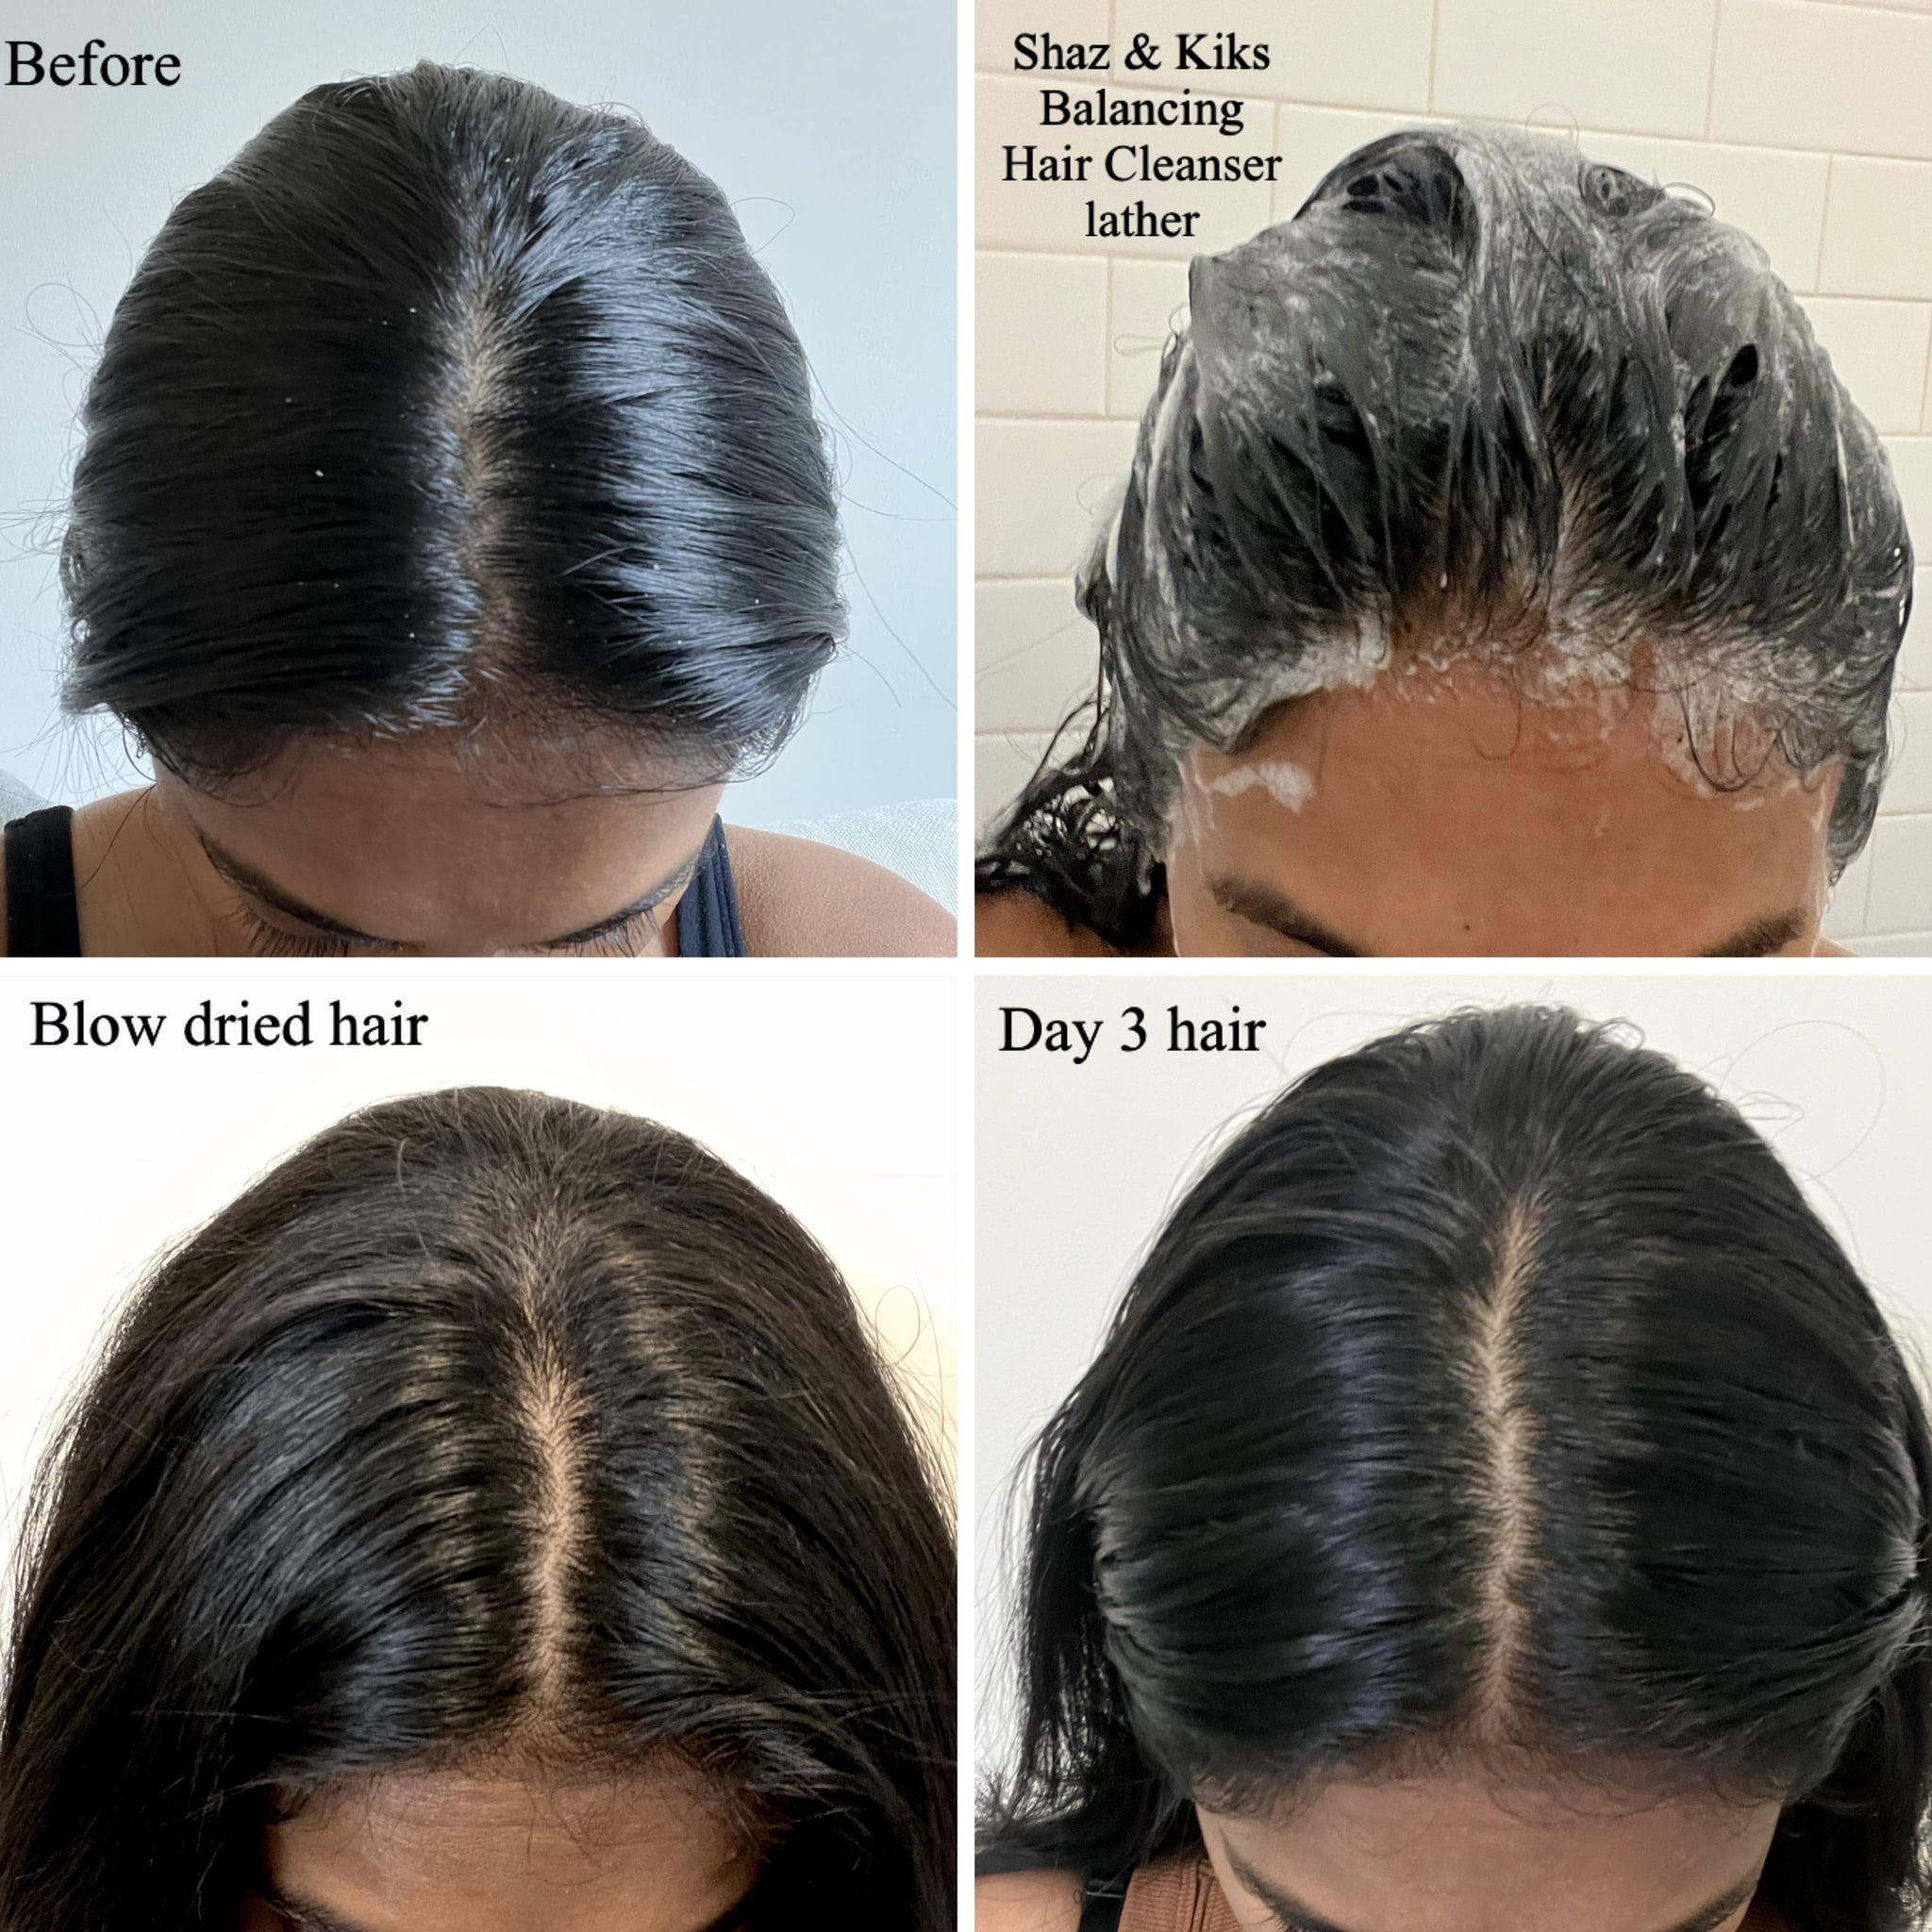 Before, during, and after using the Shaz & Kiks Unearth Yourself Balancing Clay Hair Cleanser Shampoo.